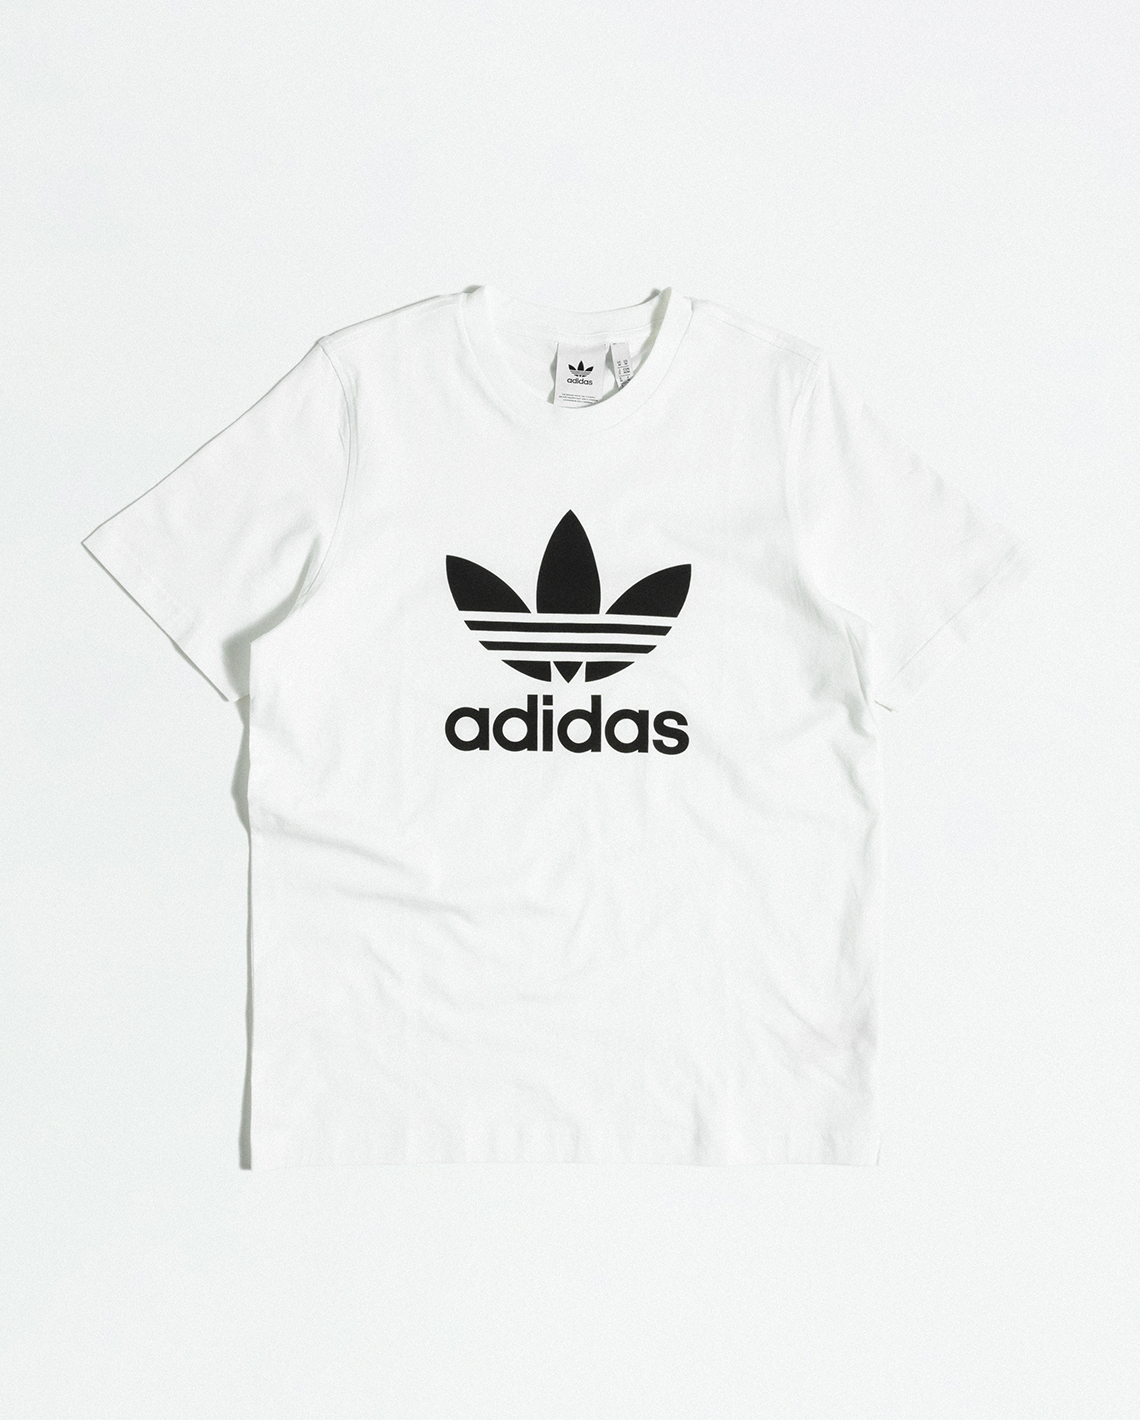 adidas apparel shopping guide march 2022 outfit 1 gallery 4